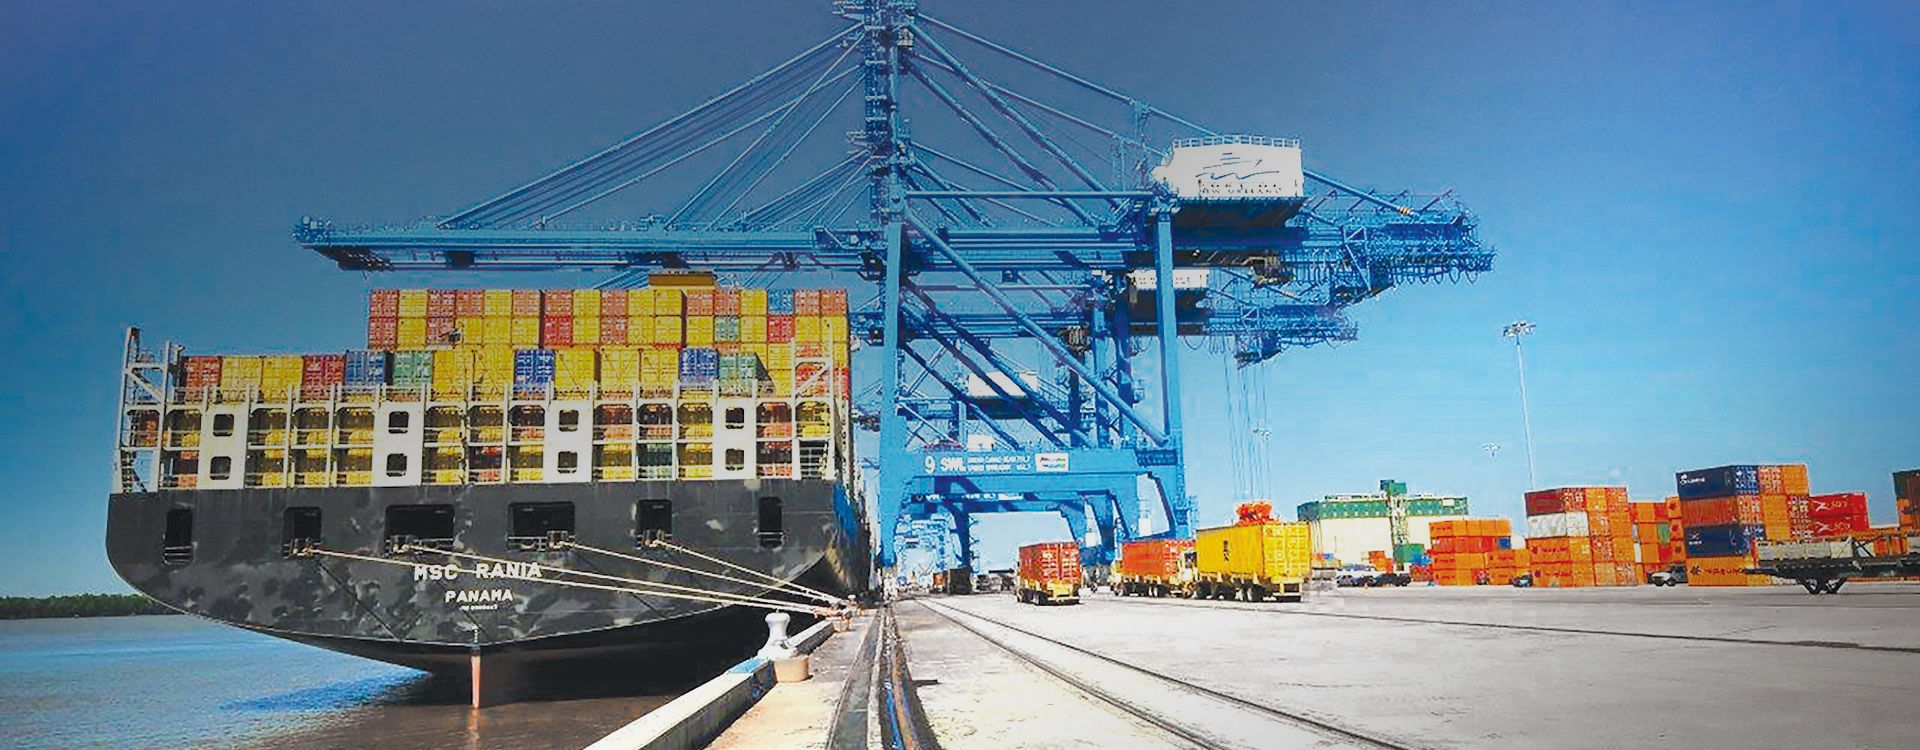 bnr-service-asset-management-Private-Investor-Global-Container-Terminals-Advisory-Services